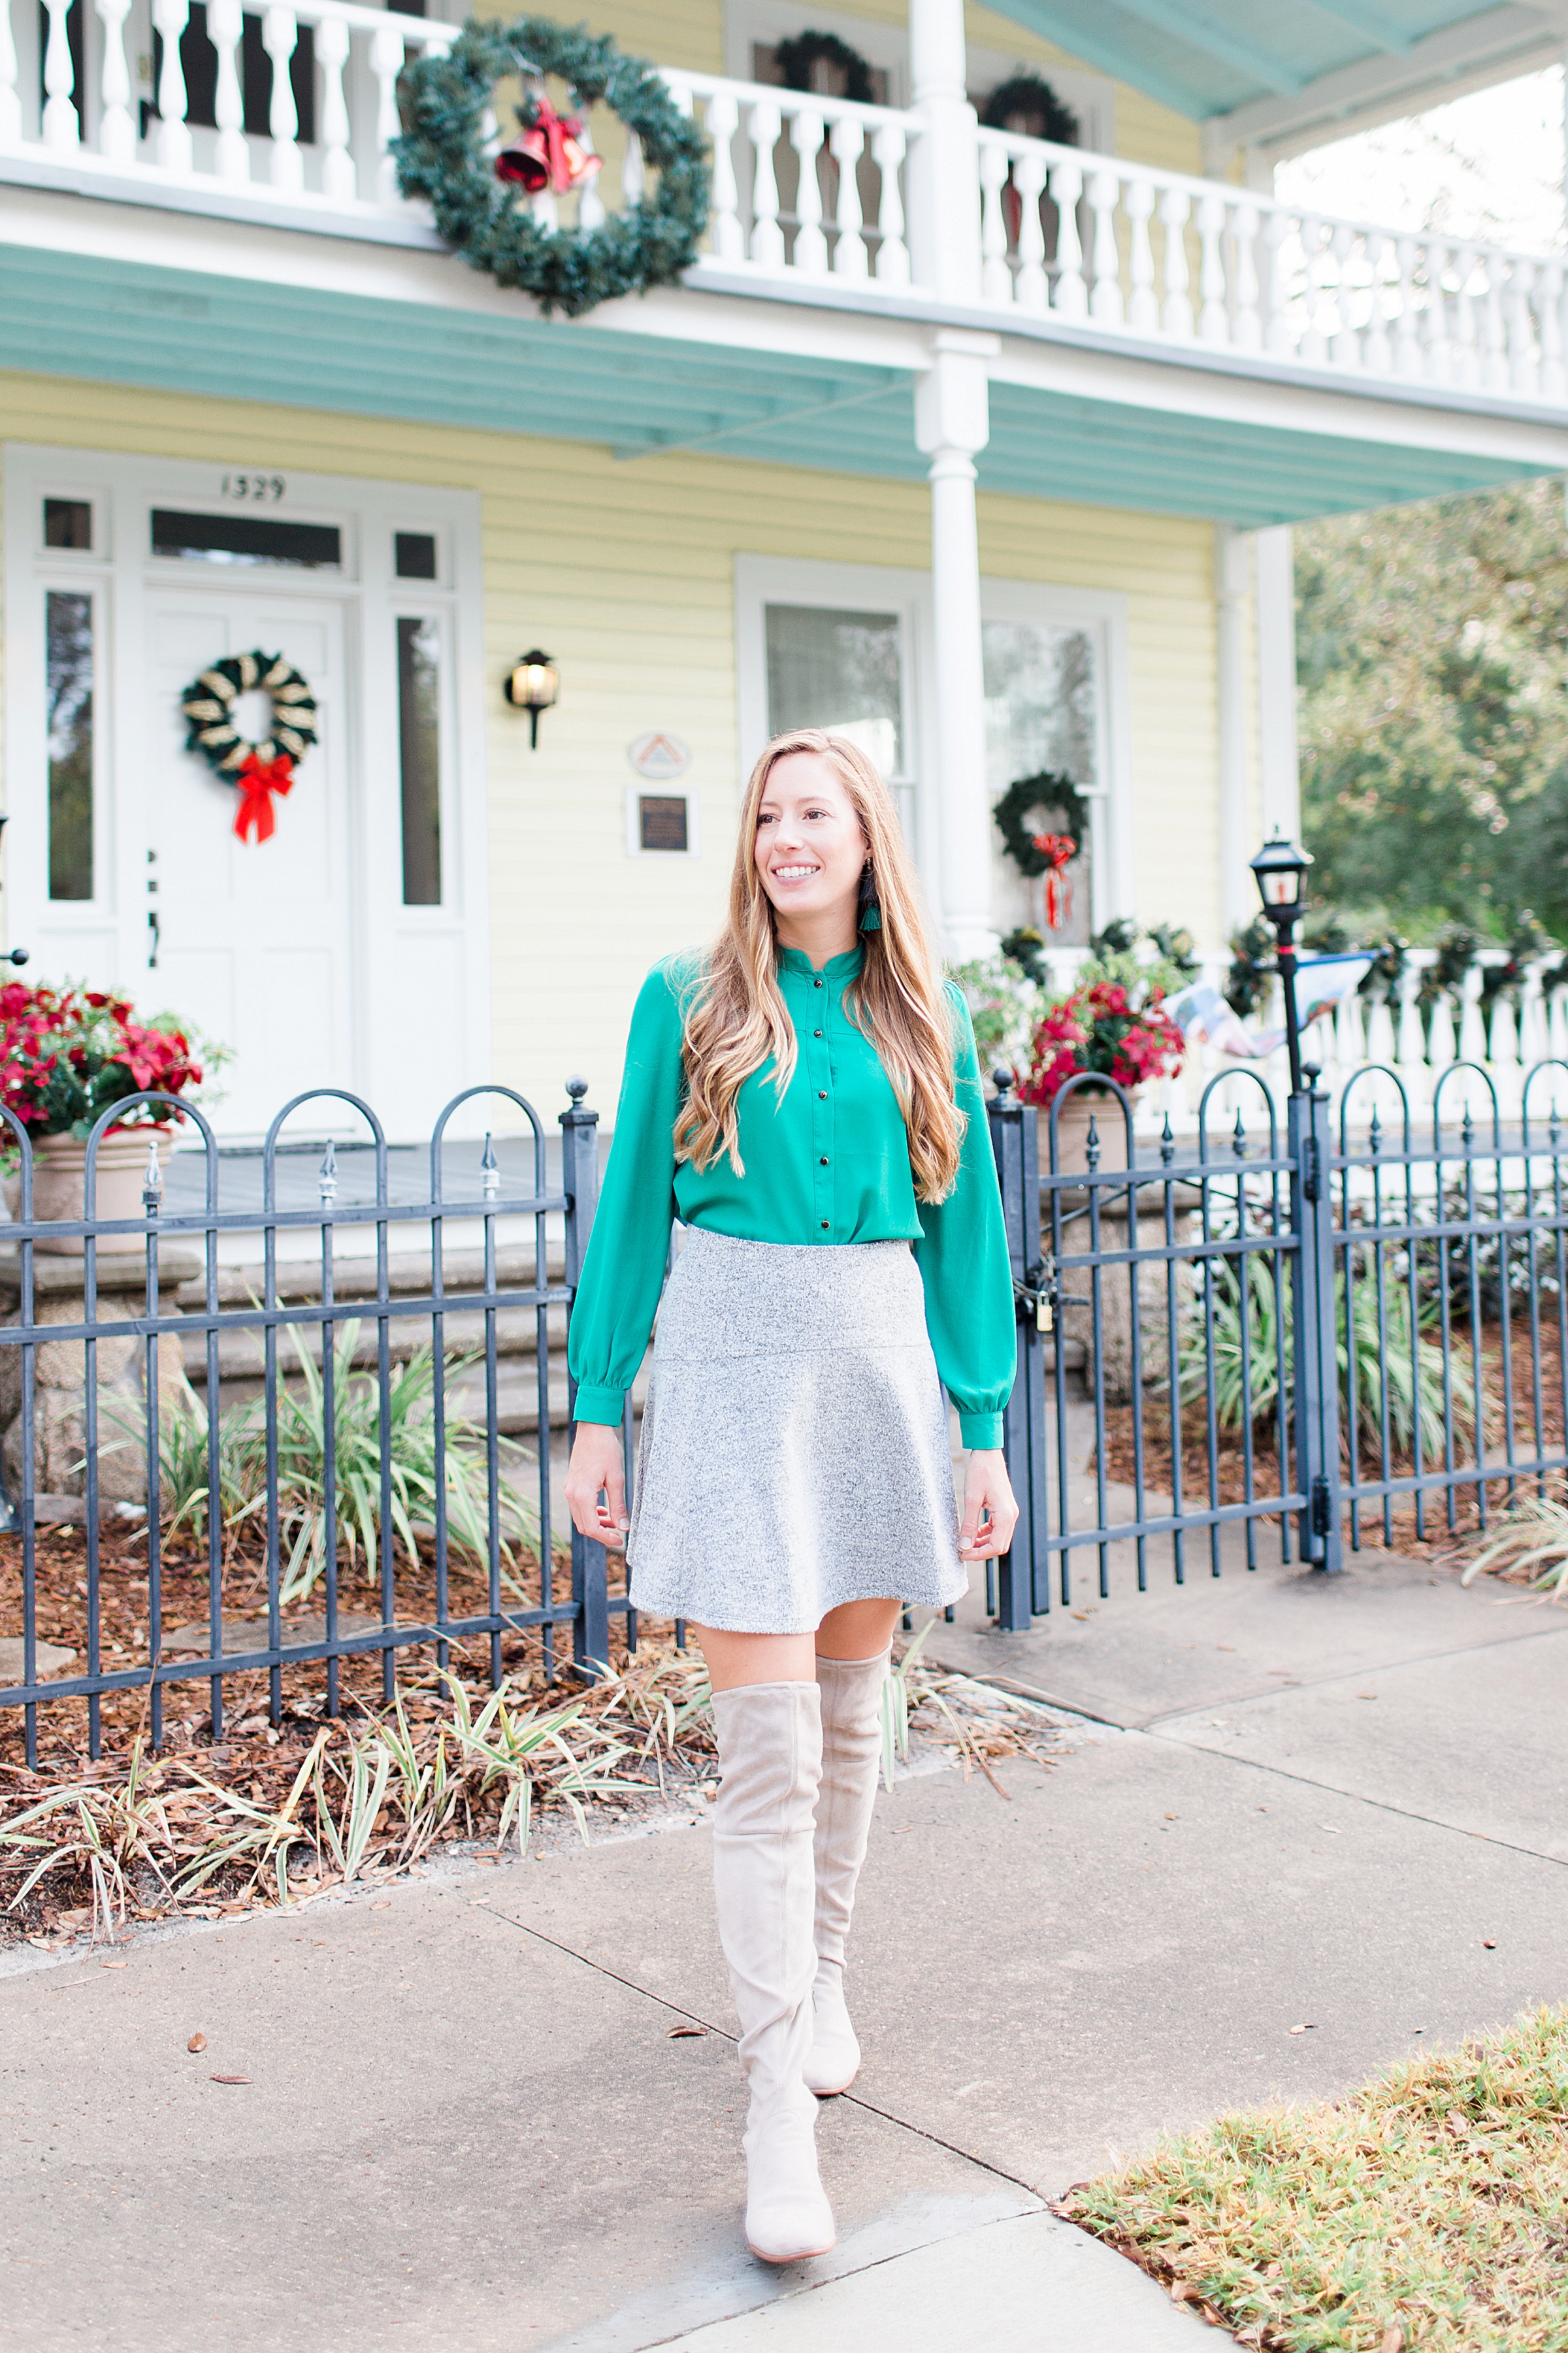 Festive Christmas Party Outfit // What to Wear for a Christmas Party // Christmas Day Outfit // Green Blouse // Grey Over the Knee Boots // LOFT Swing Skirt - More on www.sunshinestyleblog.com